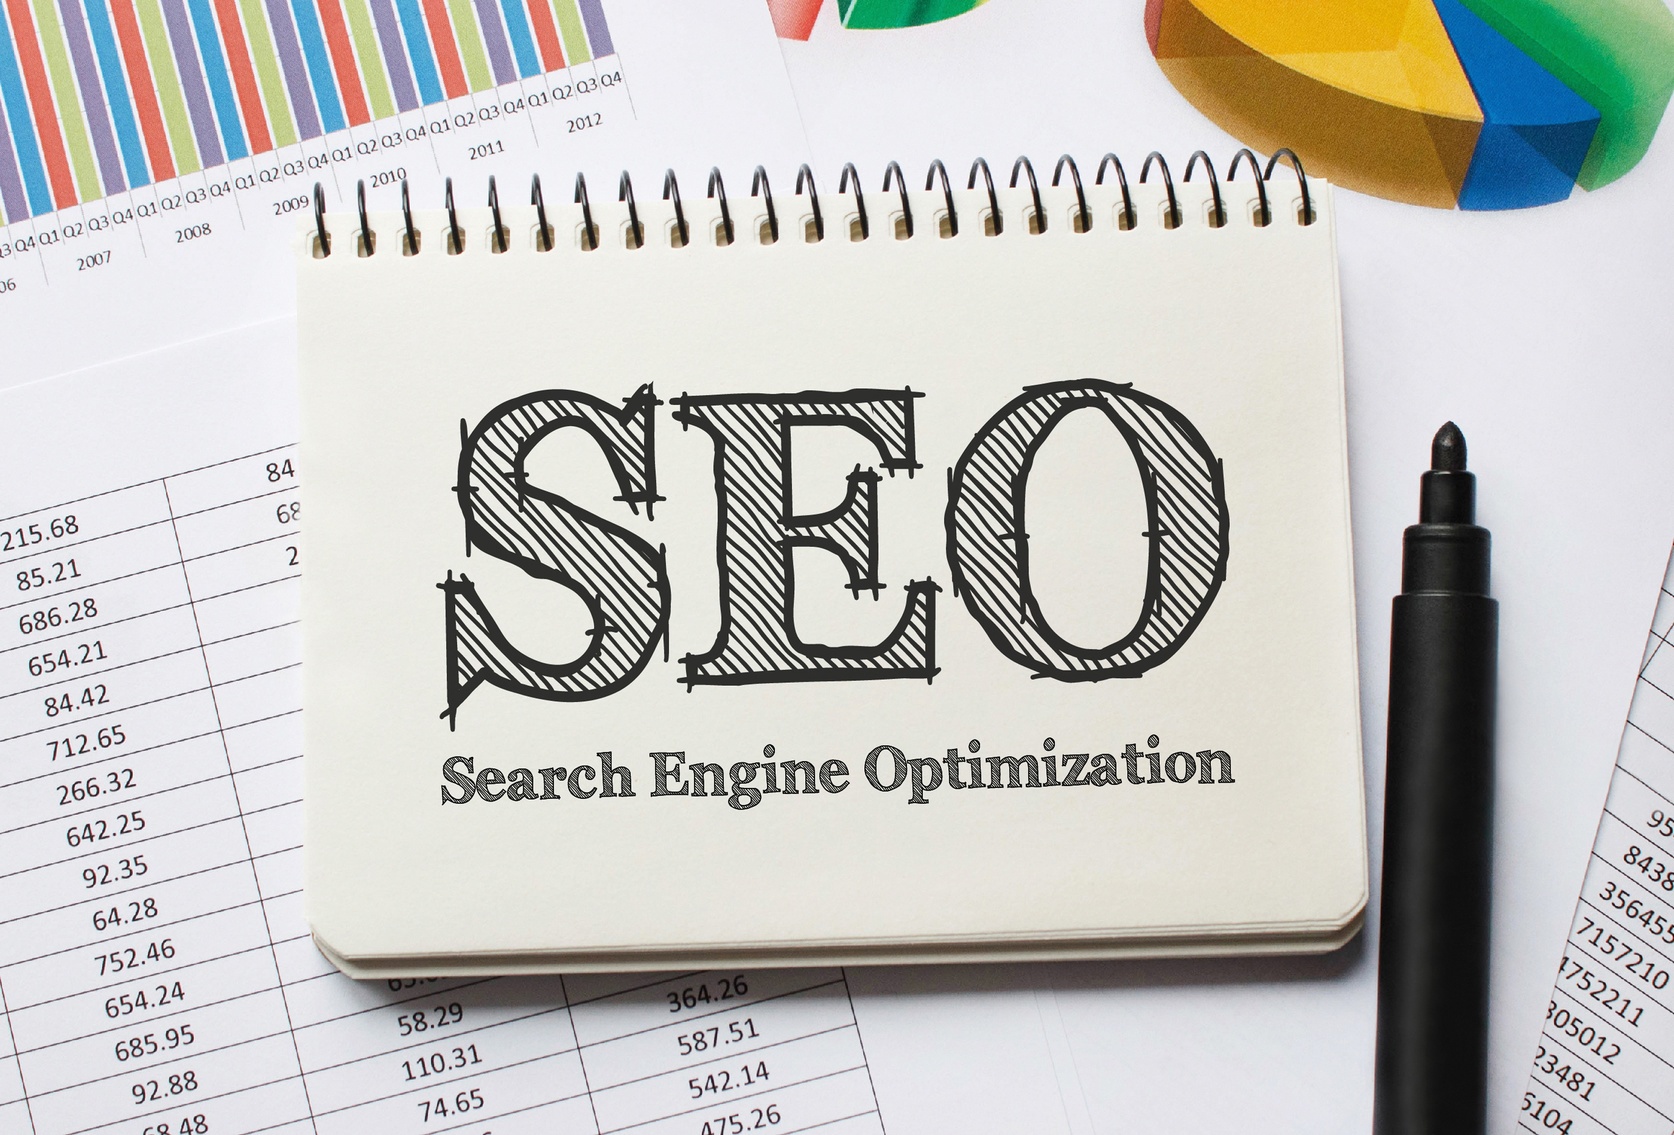 26 SEO Terms Every Marketer Should Know (Infographic)